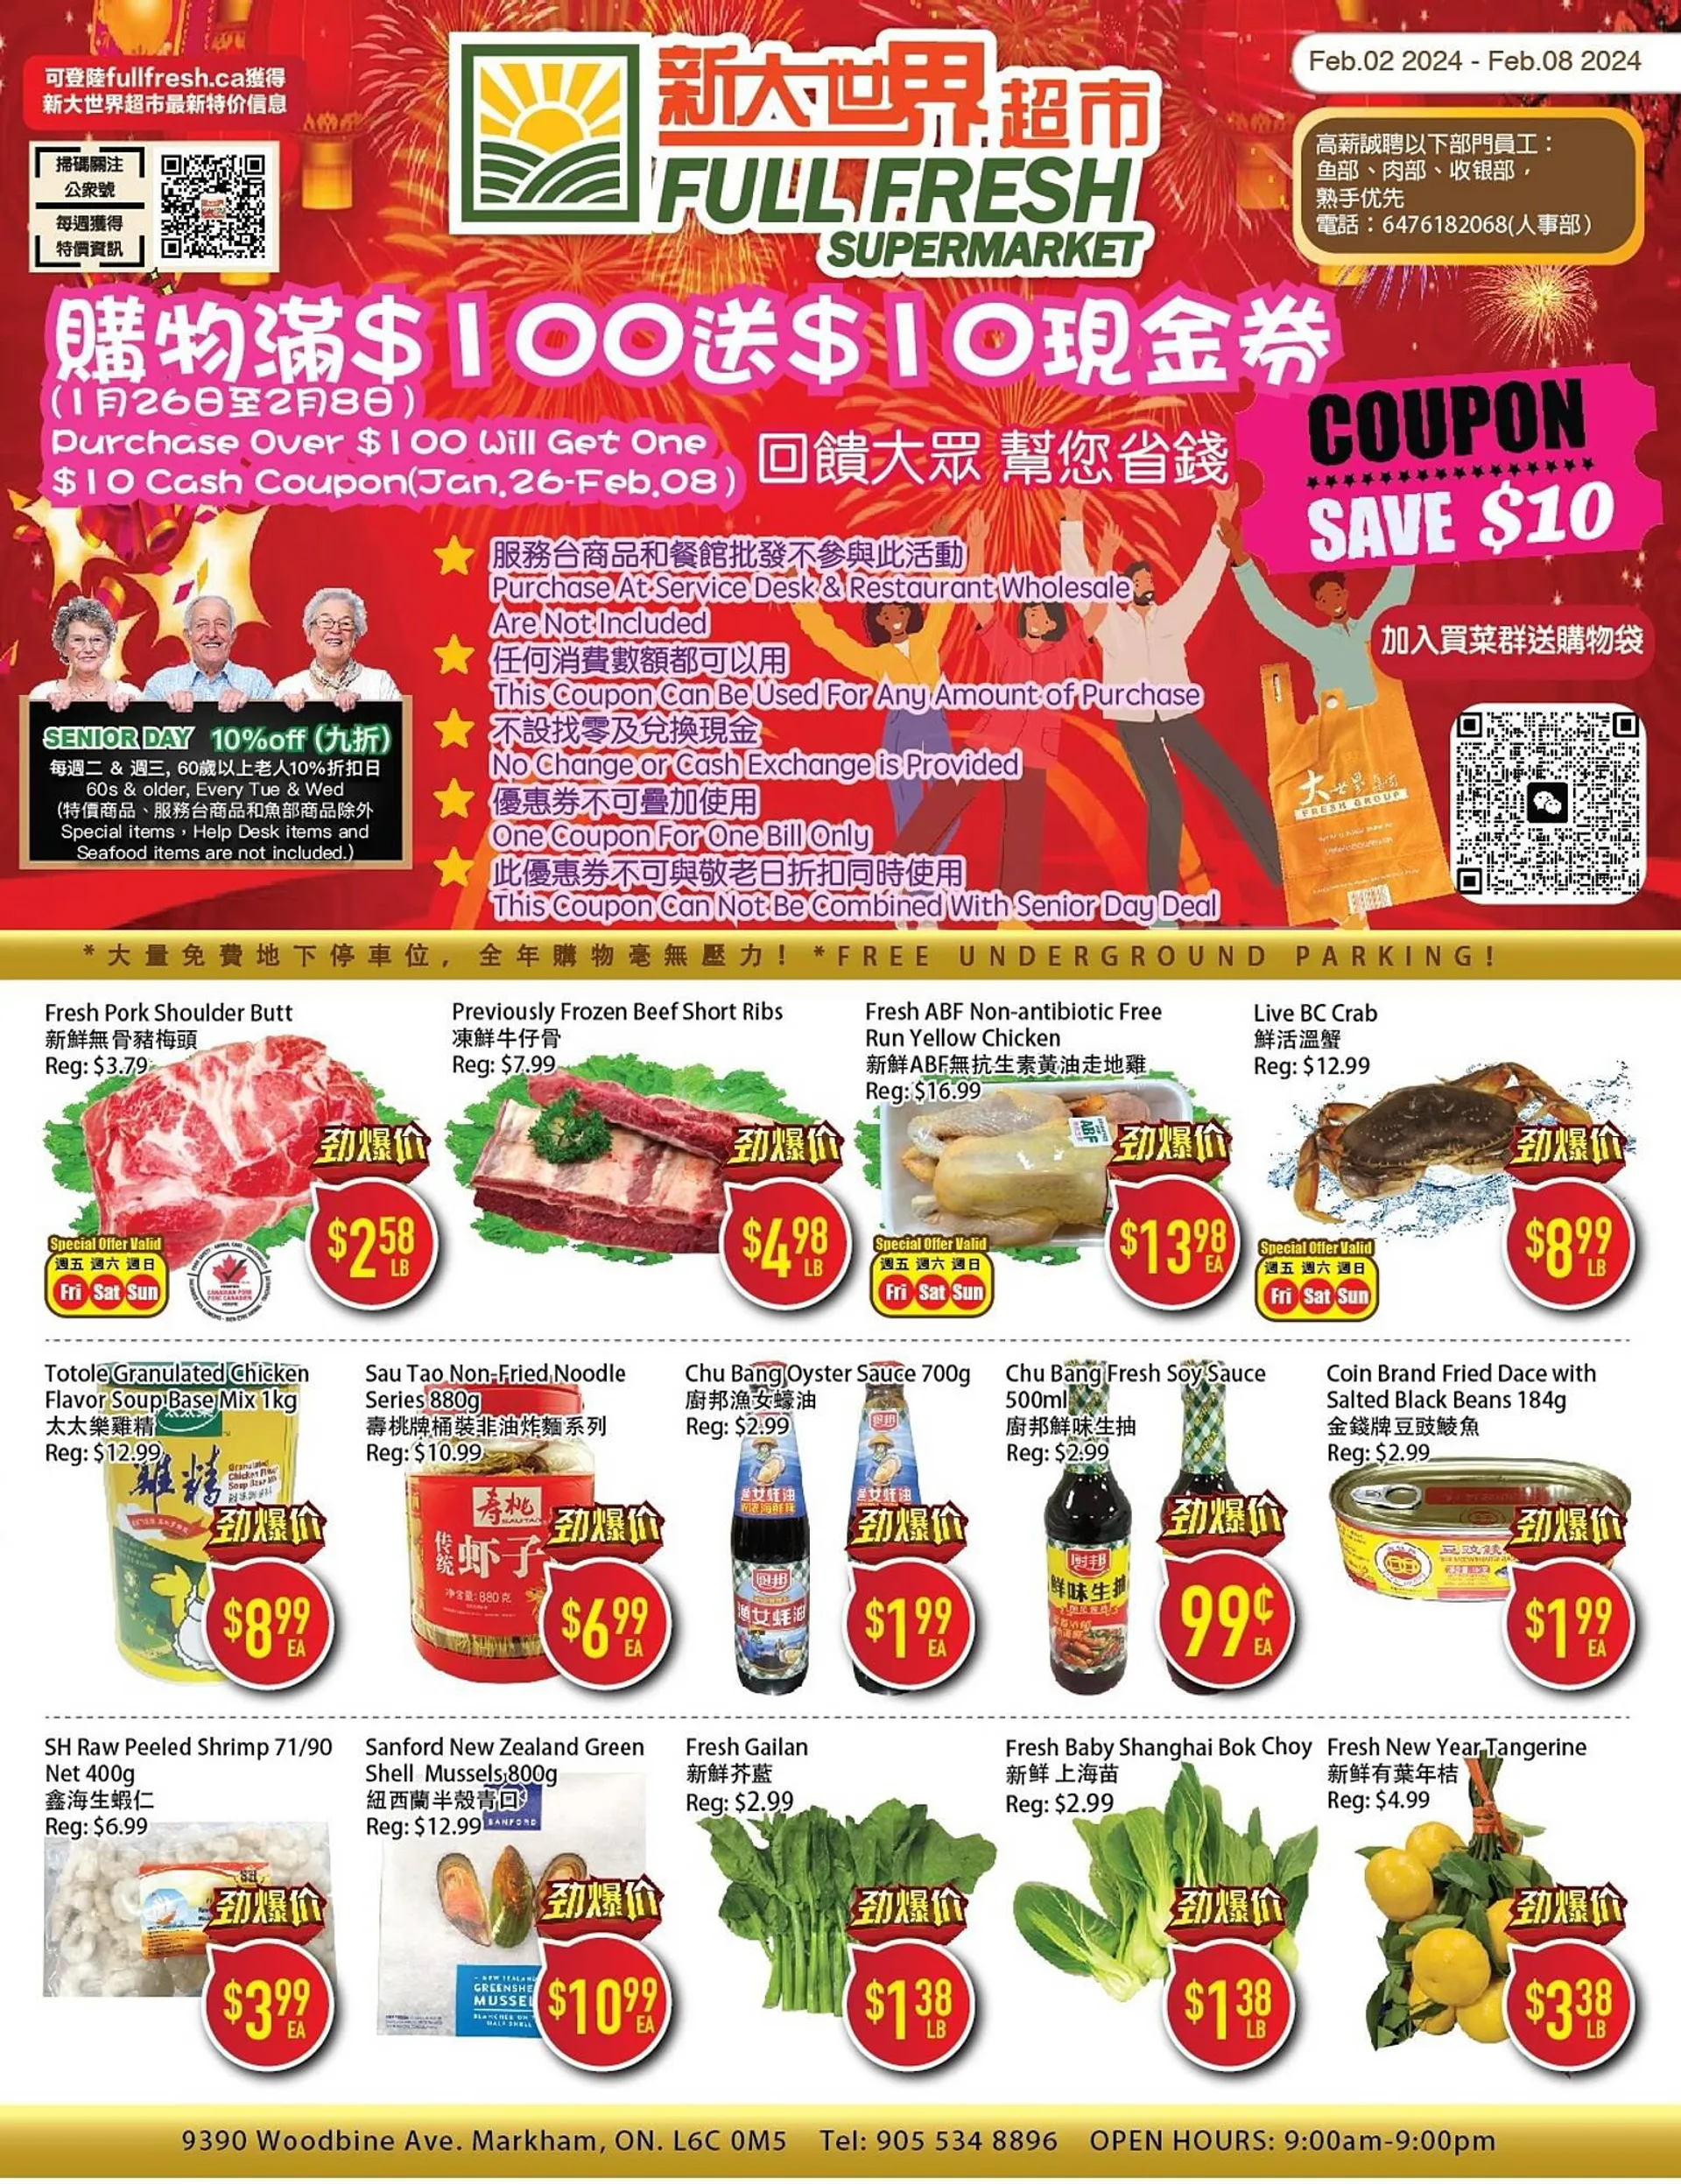 Full Fresh Supermarket flyer from February 2 to February 8 2024 - flyer page 